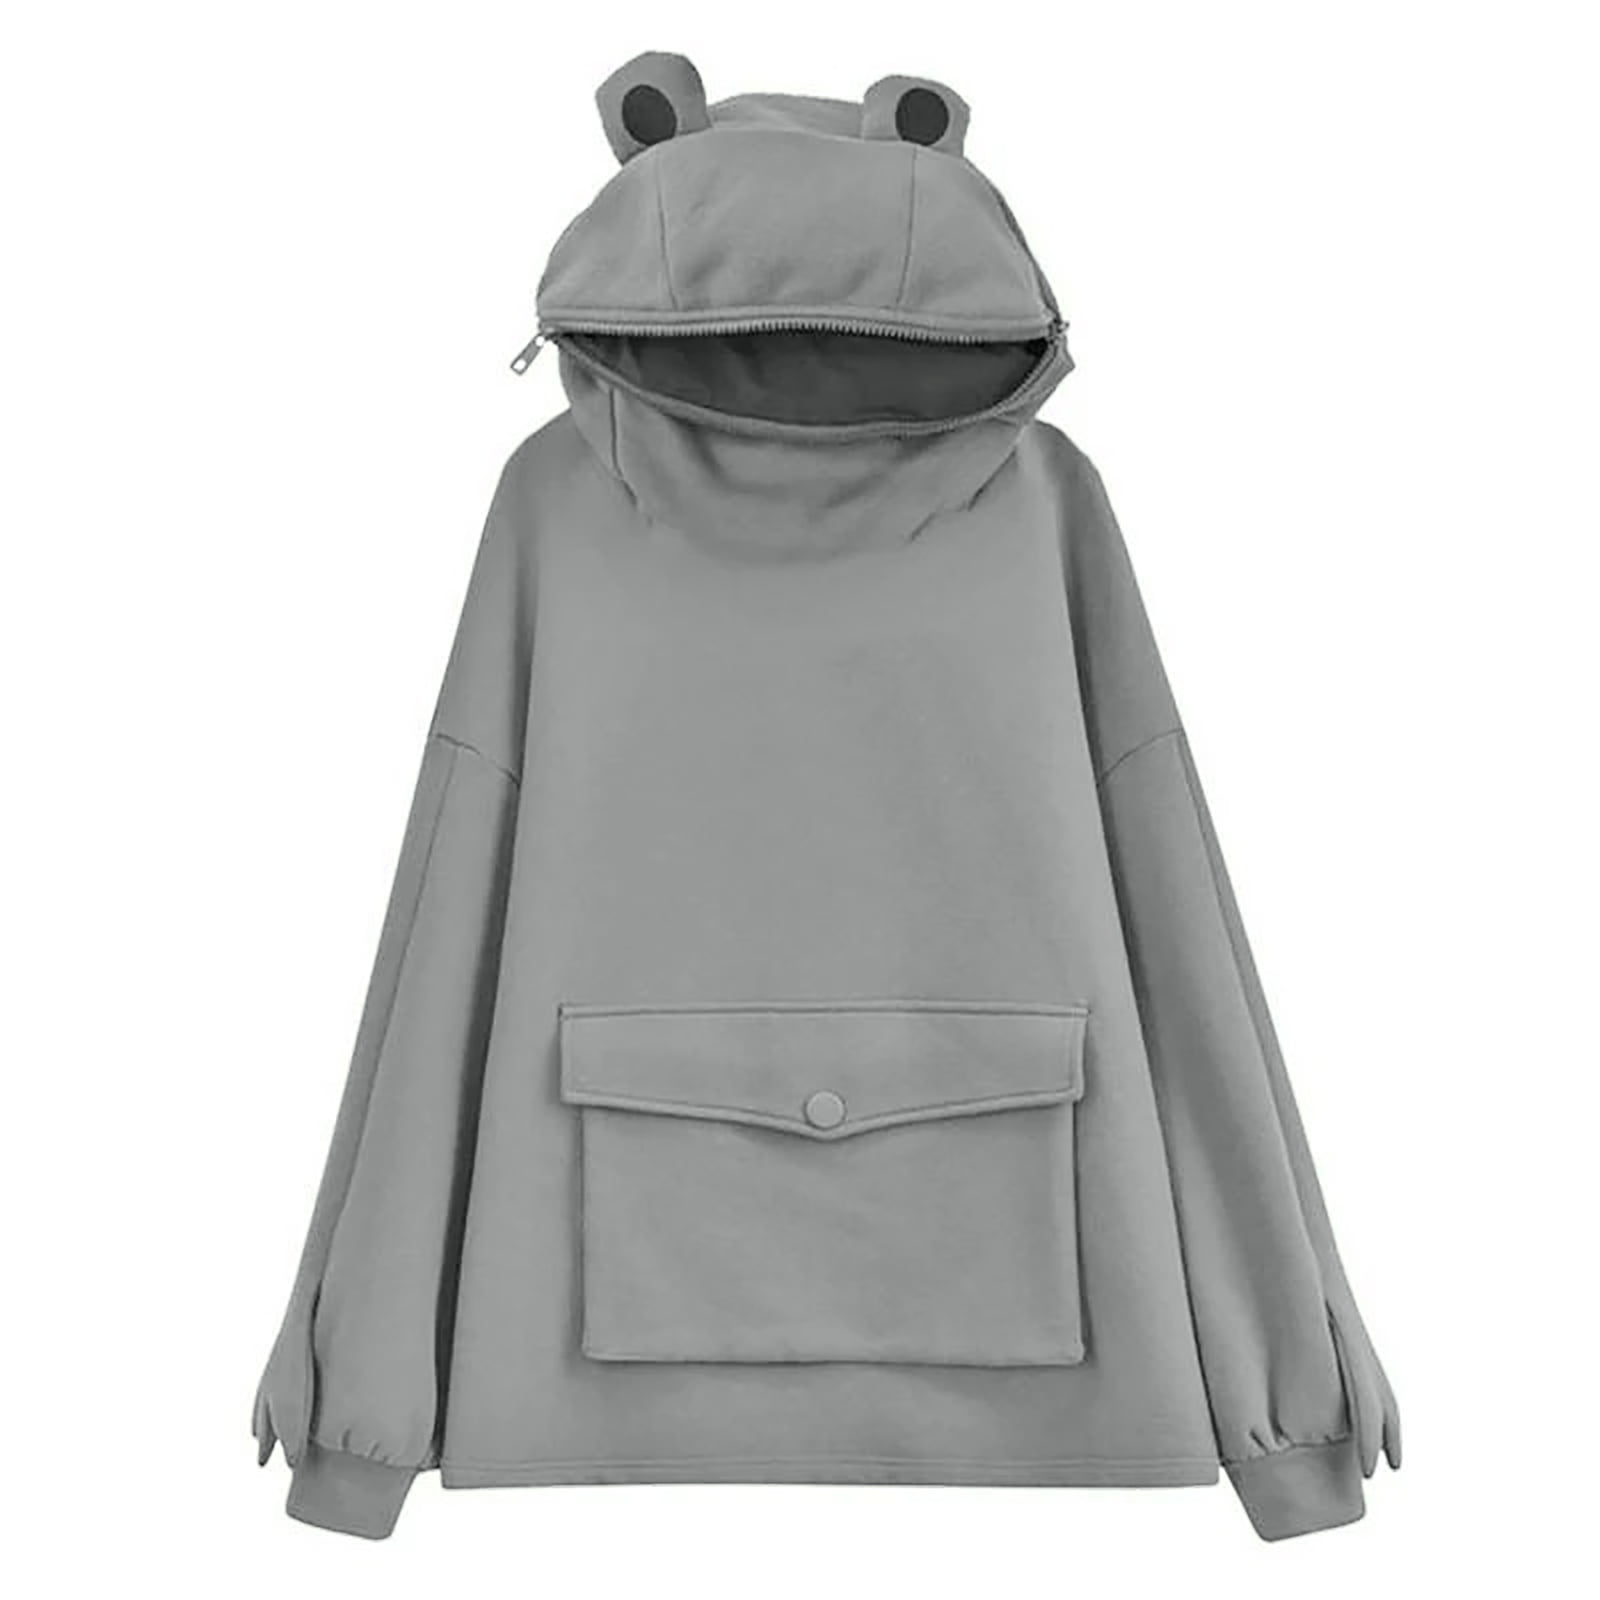 COUTEXYI Womens Novelty Frog Hoodies Zip Up Pullover Cute Animal Shape ...